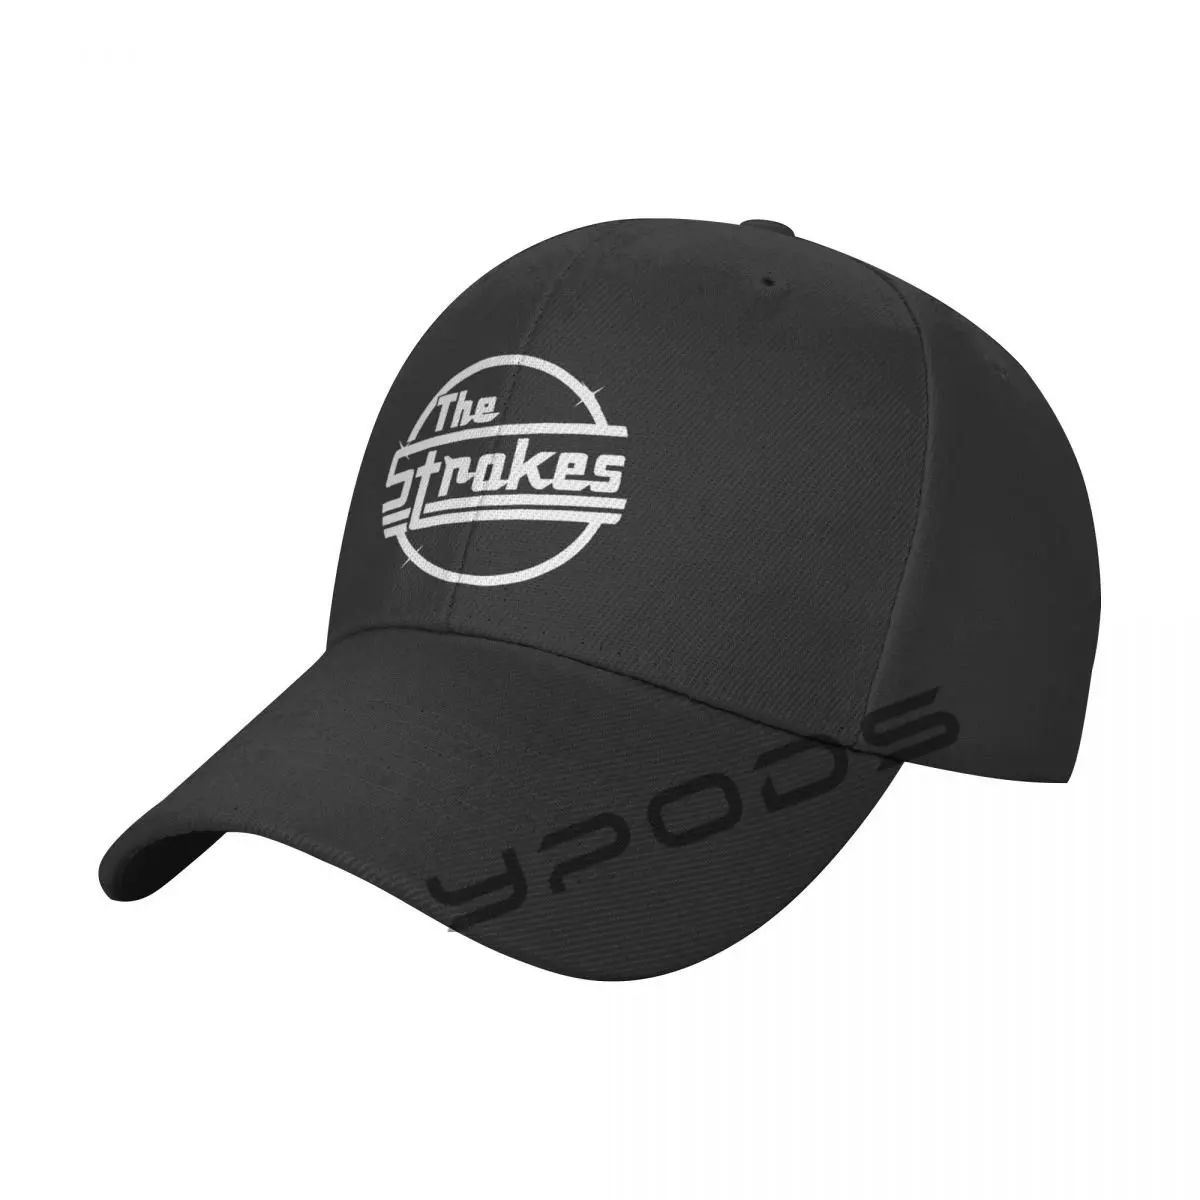 

The Strokes Band Baseball Caps For Men Women Hip Hop Breathable Dad Hats Fashion Hat Trucker Dropshipping